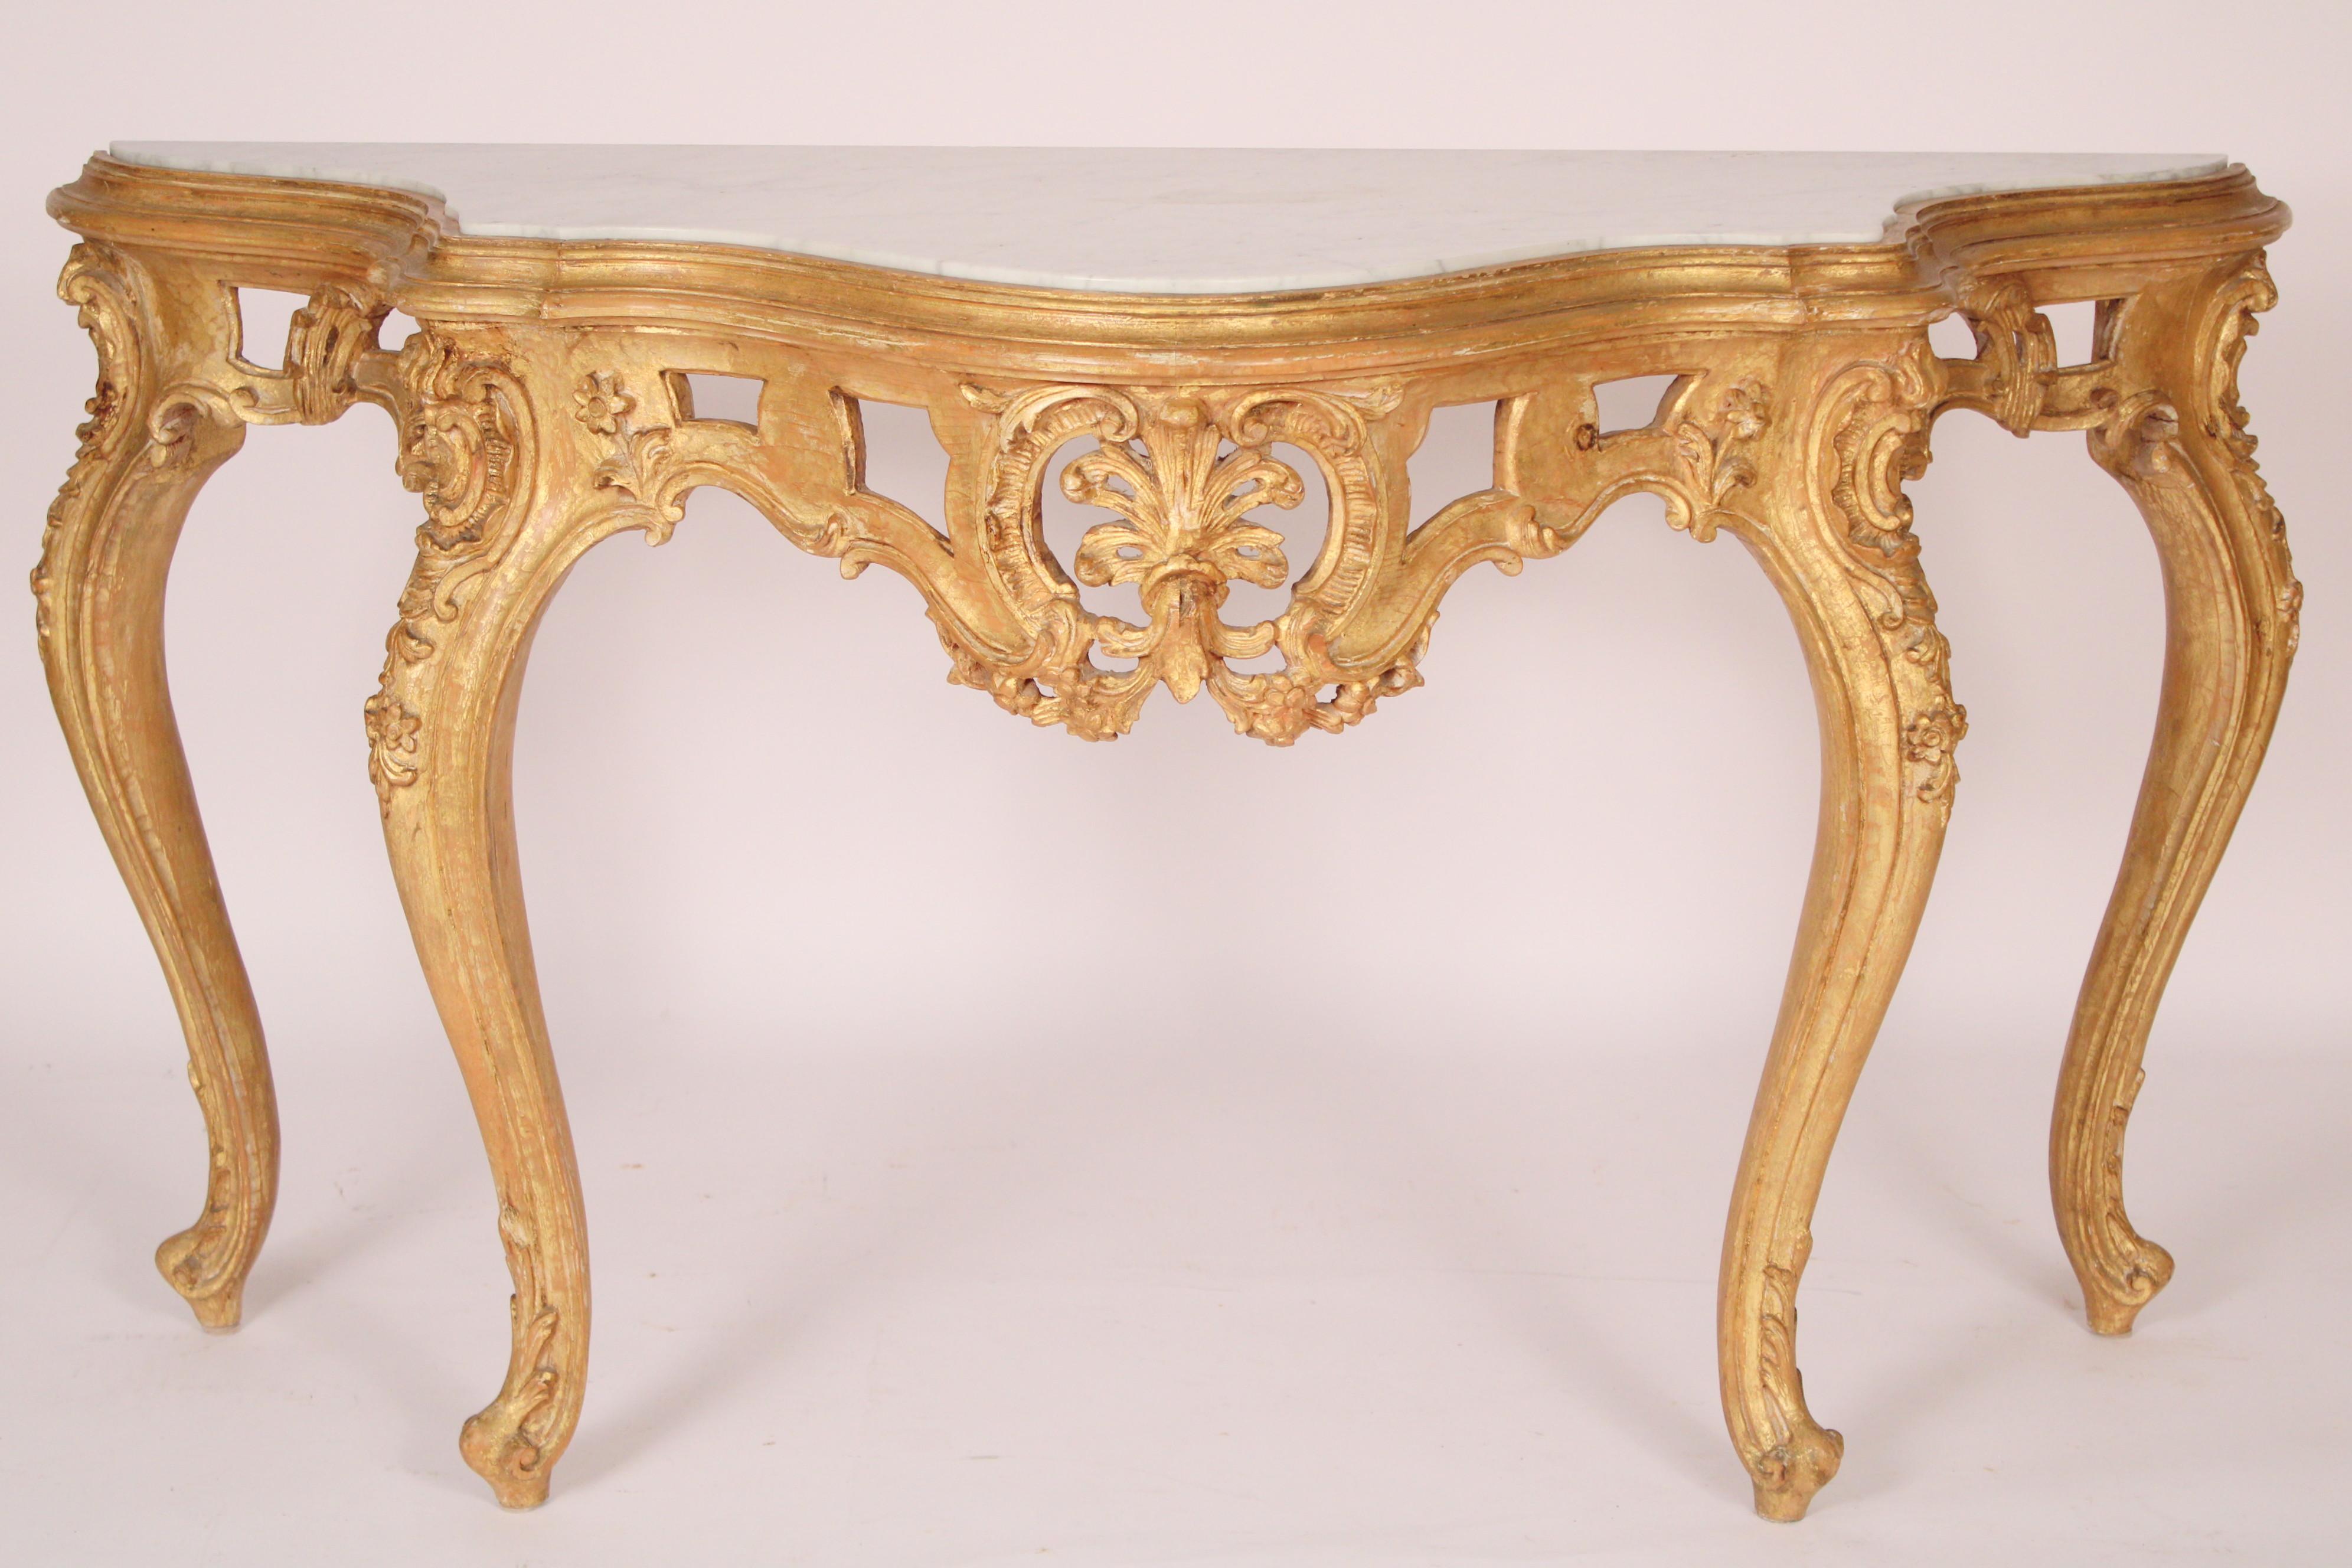 Louis XV style carved gilt wood marble top console table, late 20th century. The top with an inset Carrera marble top, gilt wood frieze with central floral carving, resting on cabriole legs ending in French fiddle feet. The finish is intentionally